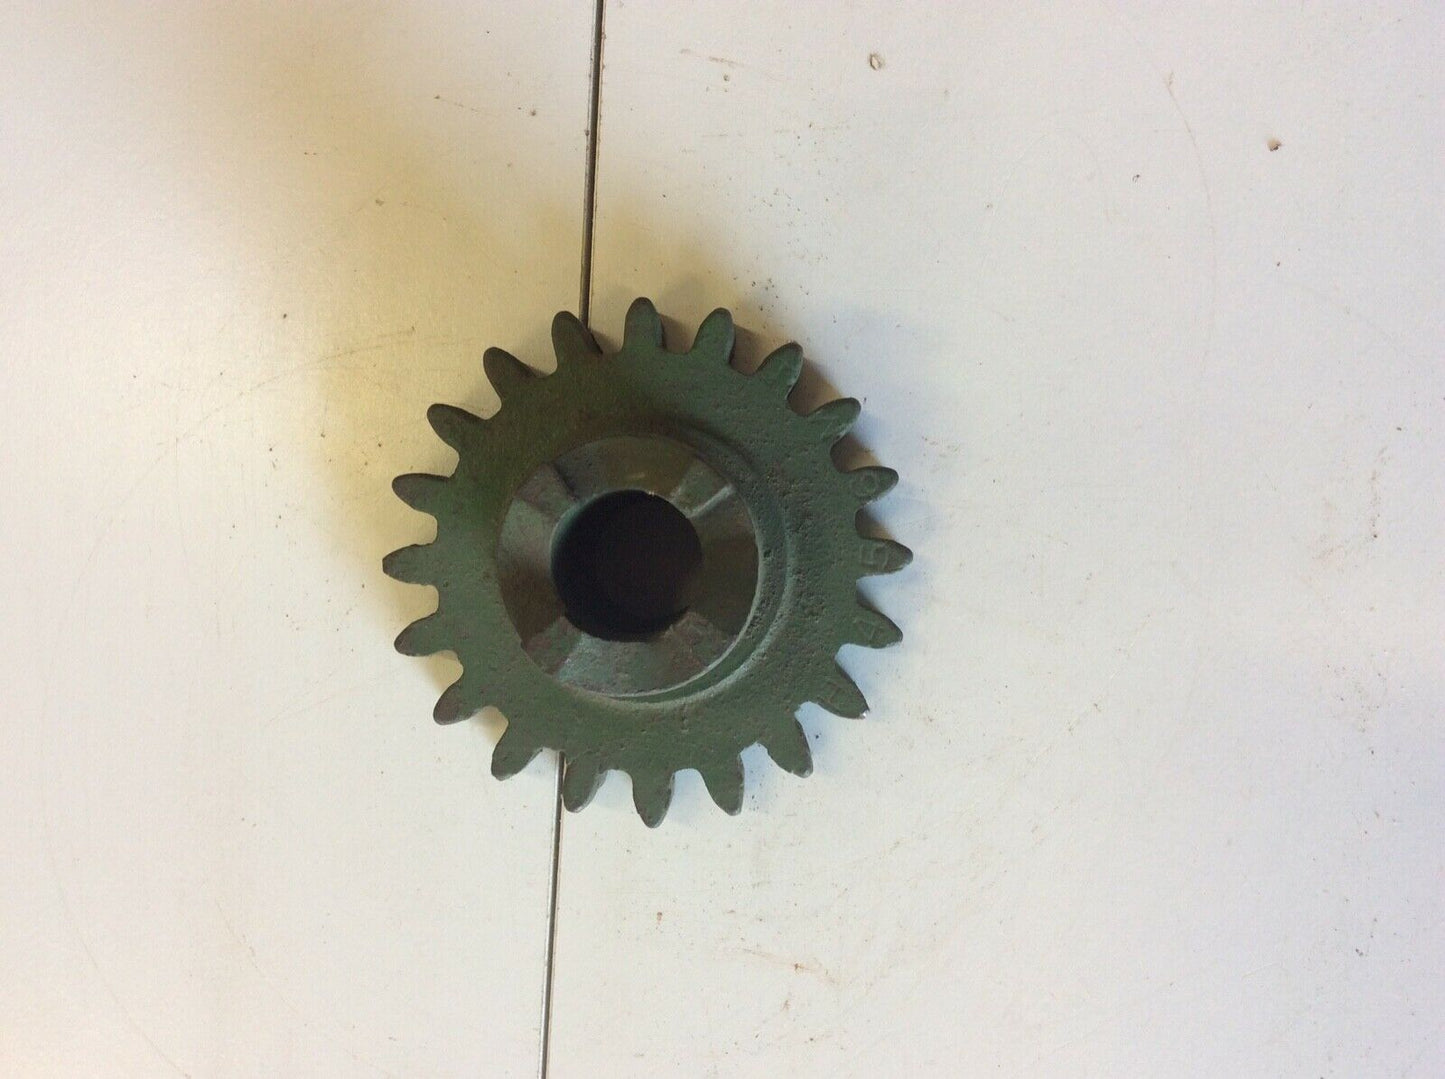 H456M John Deere NOS Feed Shaft Gear With 20 Teeth For Number 7 Fertilizer Distributor